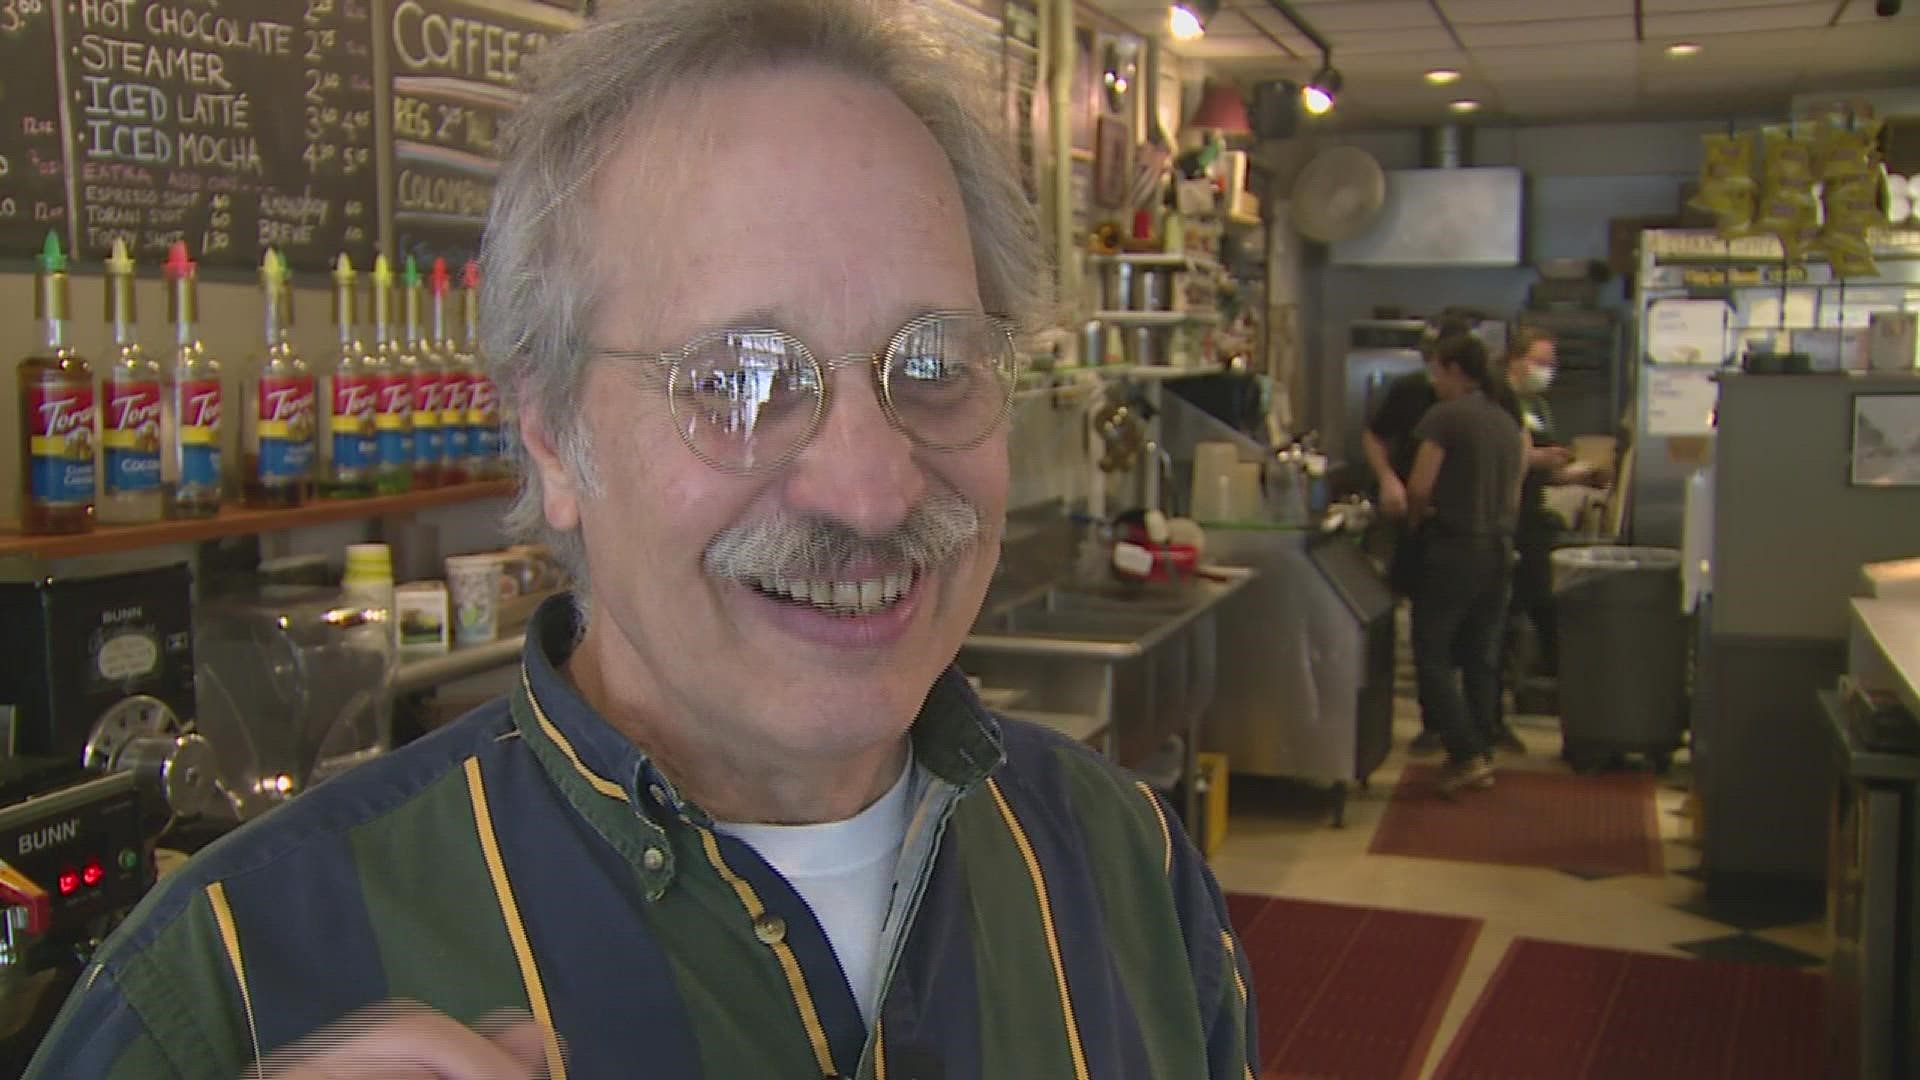 The iconic Rock Island coffee shop is changing owners after 27 years. Theo Grevas's last day has been filled with familiar faces and nearly 3 decades of memories.